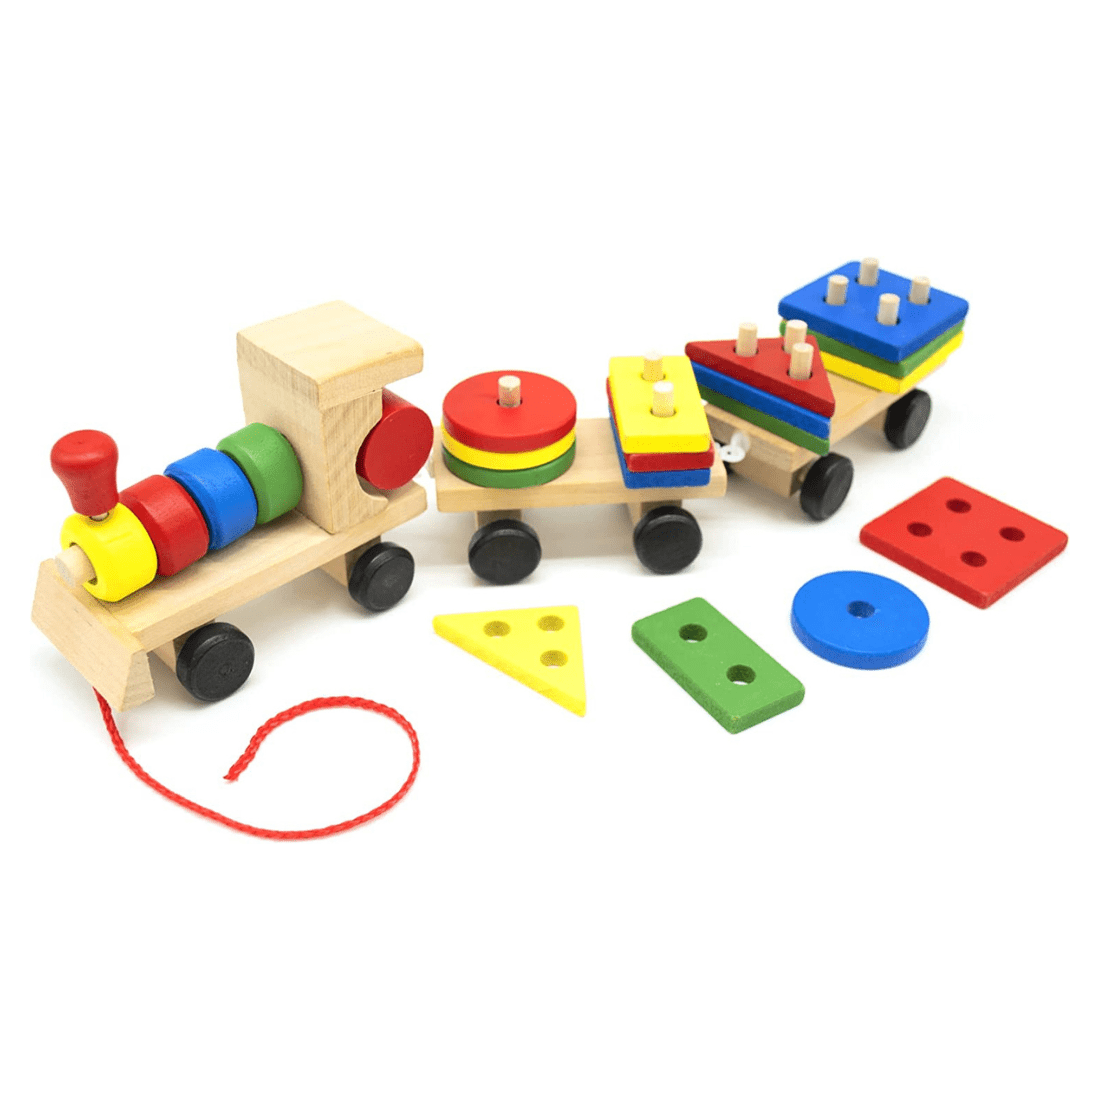 Wooden Train with Shape Sorter & Pegs - Fine Motor Skills Toys, Toddler Stacking Toys, Montessori Inspired Toys for Toddlers 3 Years, Wooden Toys for Toddlers - Wood Shape Sorter Train